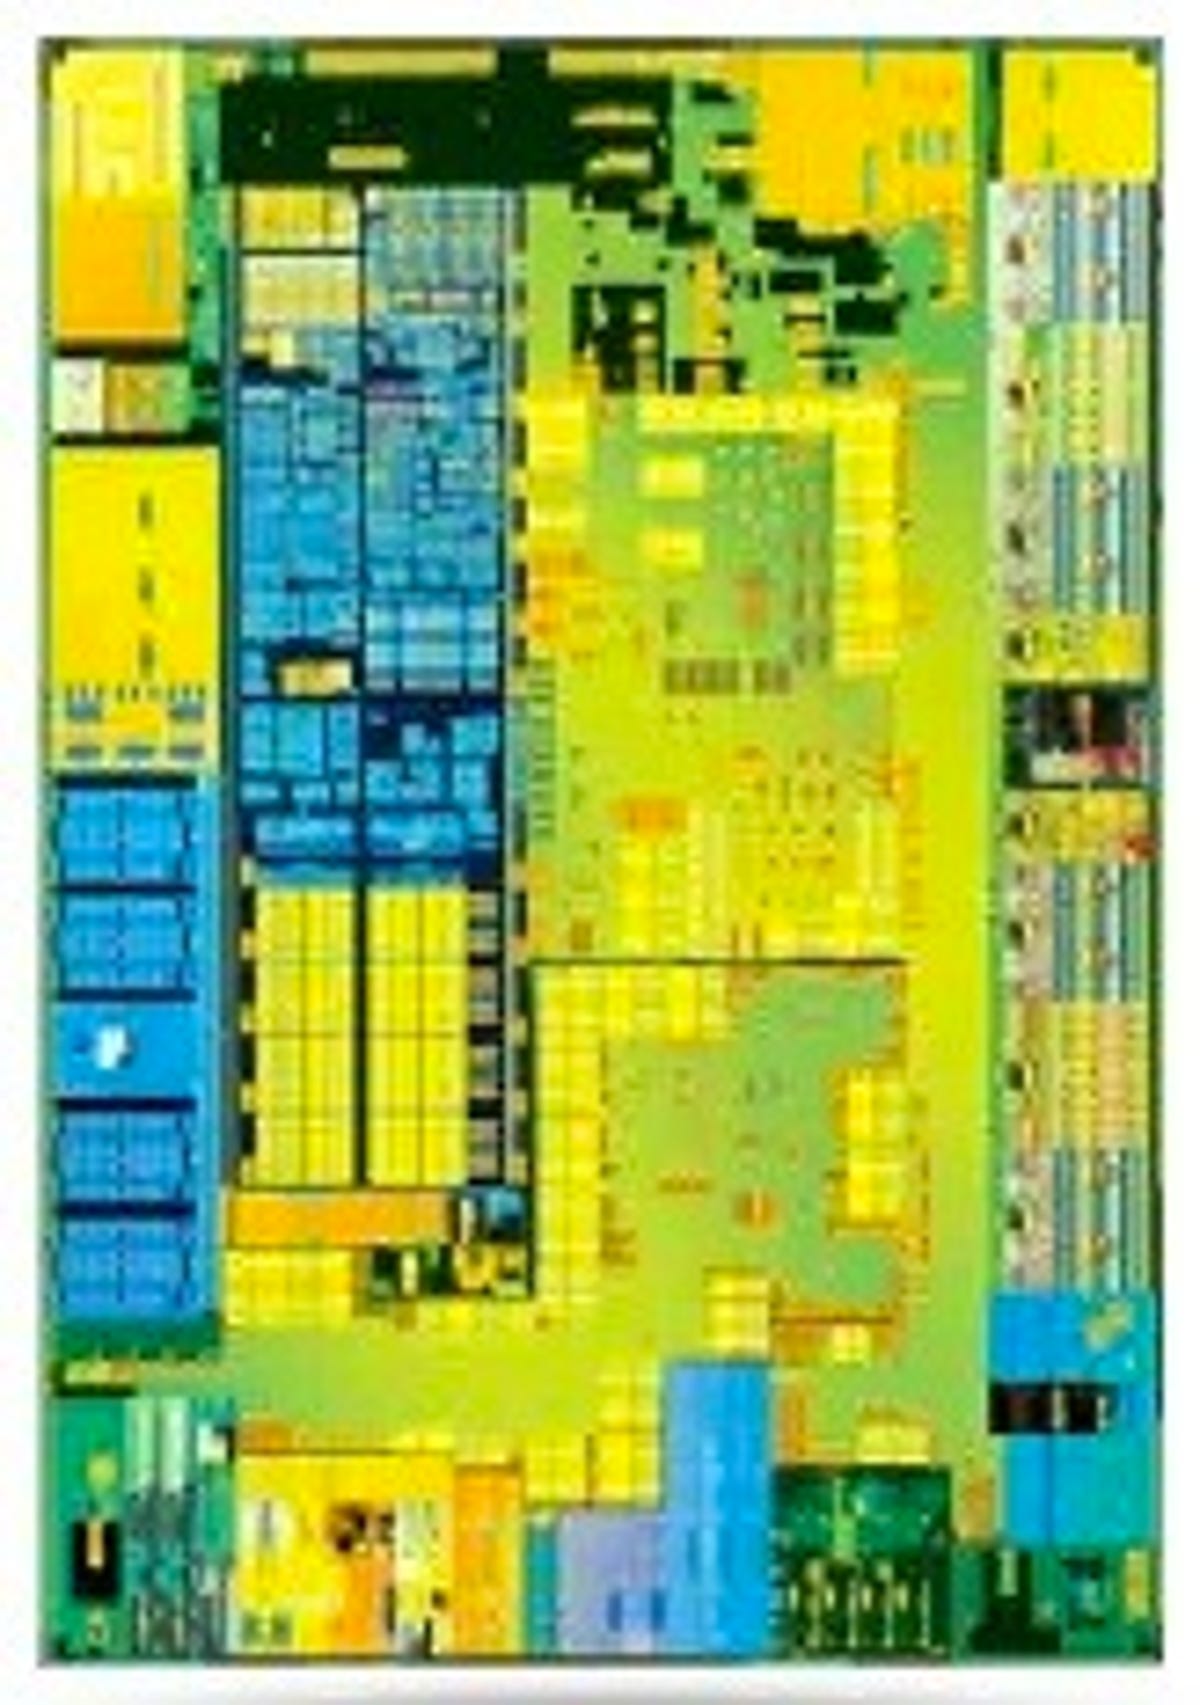 Intel's CE4100 crams a lot of functionality into a system-on-a-chip.